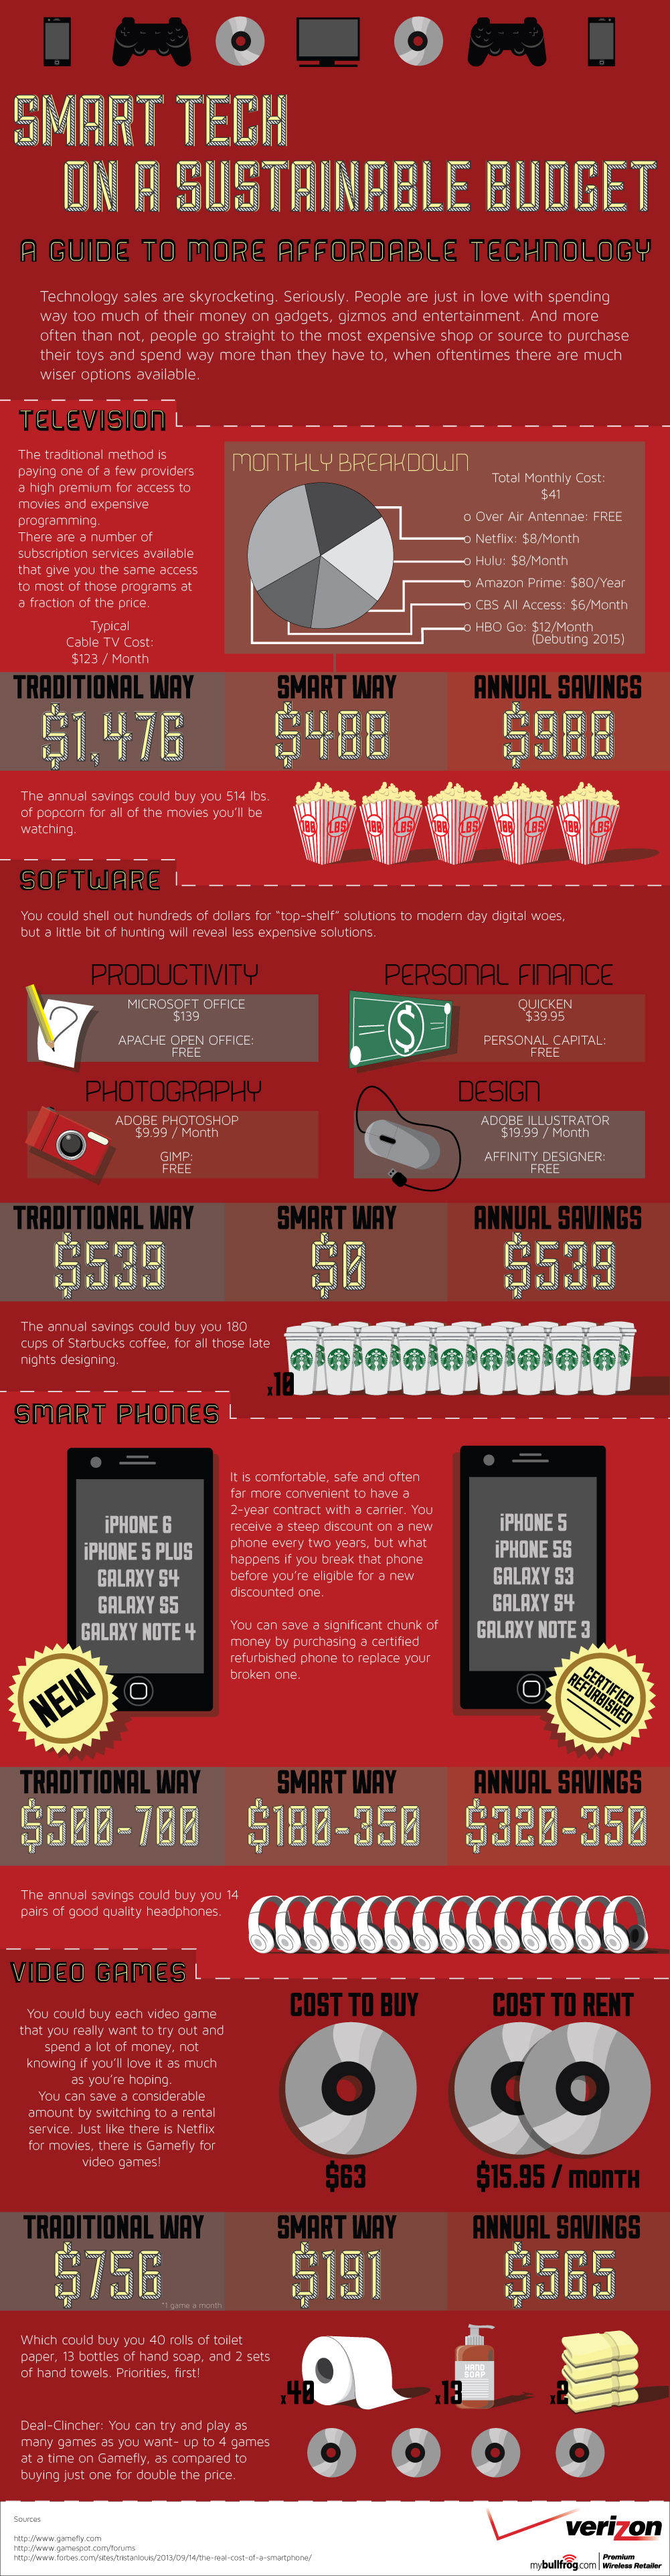 Improve The Battery Life of Your Smartphone | Mybullfrog Infographic